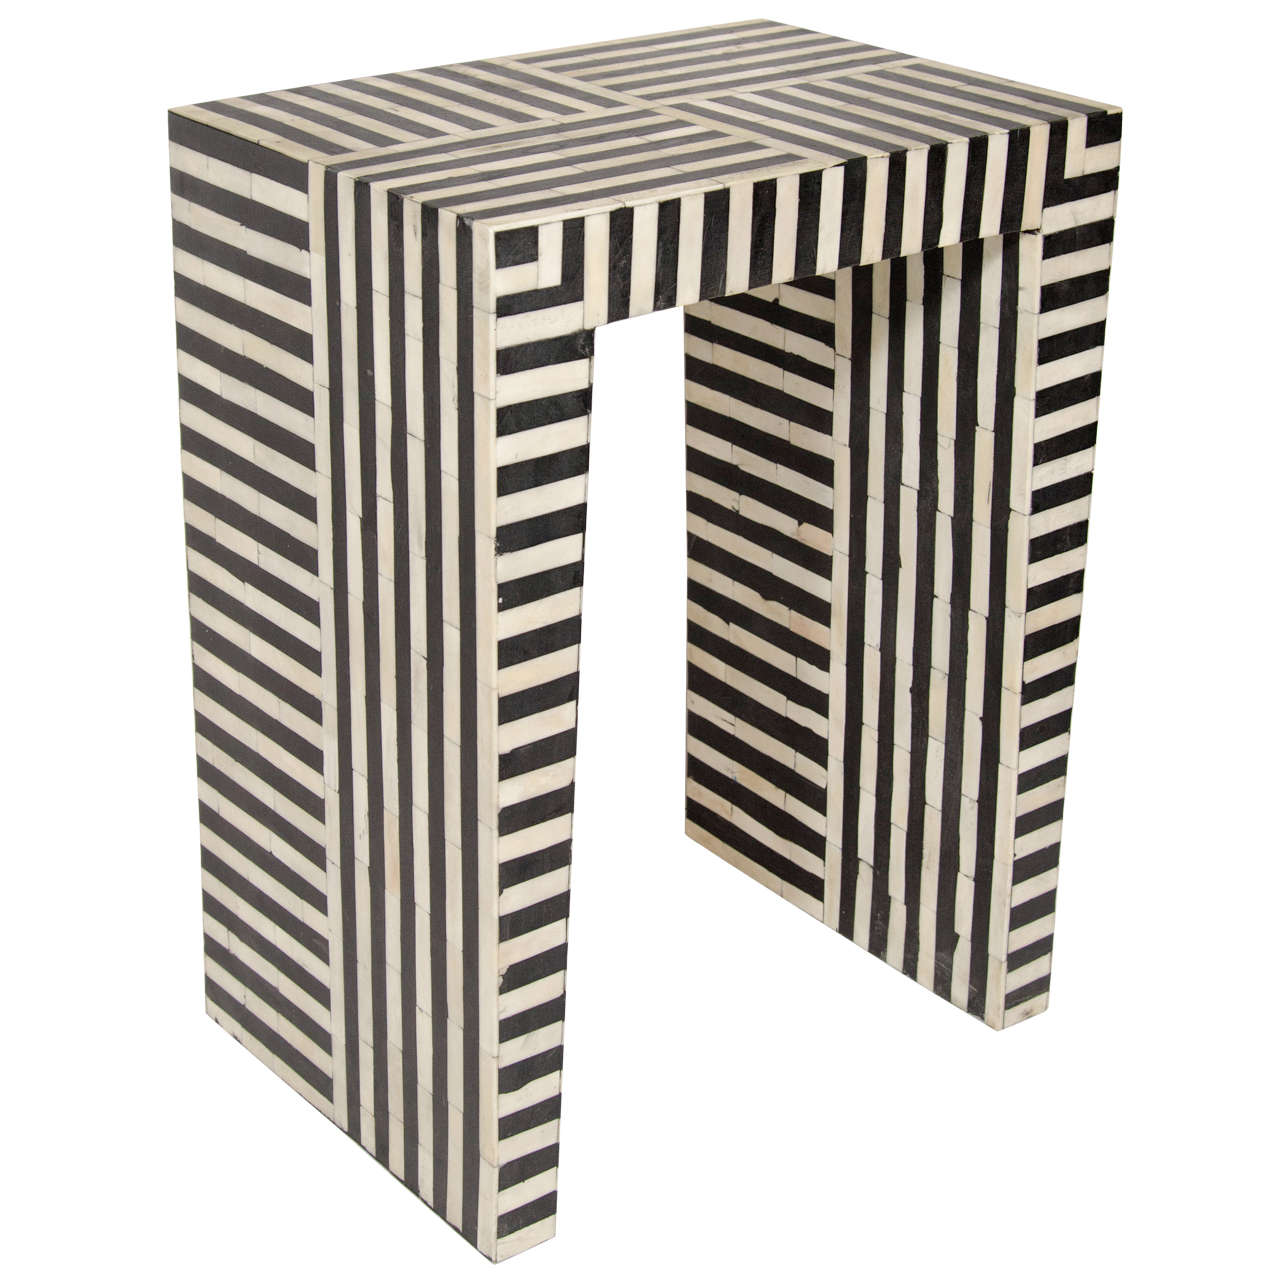 Indian Bone Inlay Black & White Striped Side Table